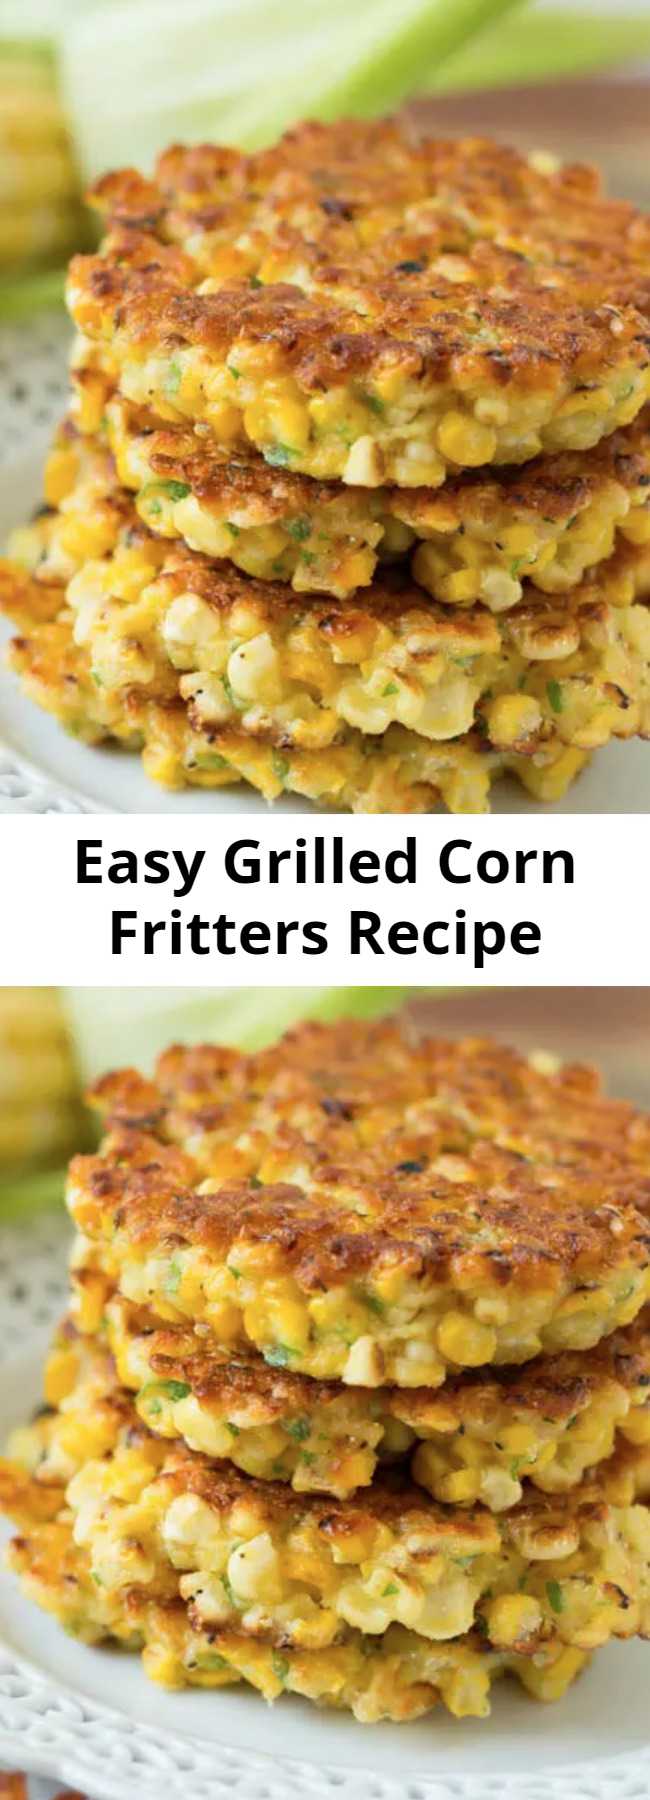 Easy Grilled Corn Fritters Recipe - Grilled corn fritters are a great way to use up all that fresh summer corn and a great, new way to eat it too! These little cakes are so easy to put together!